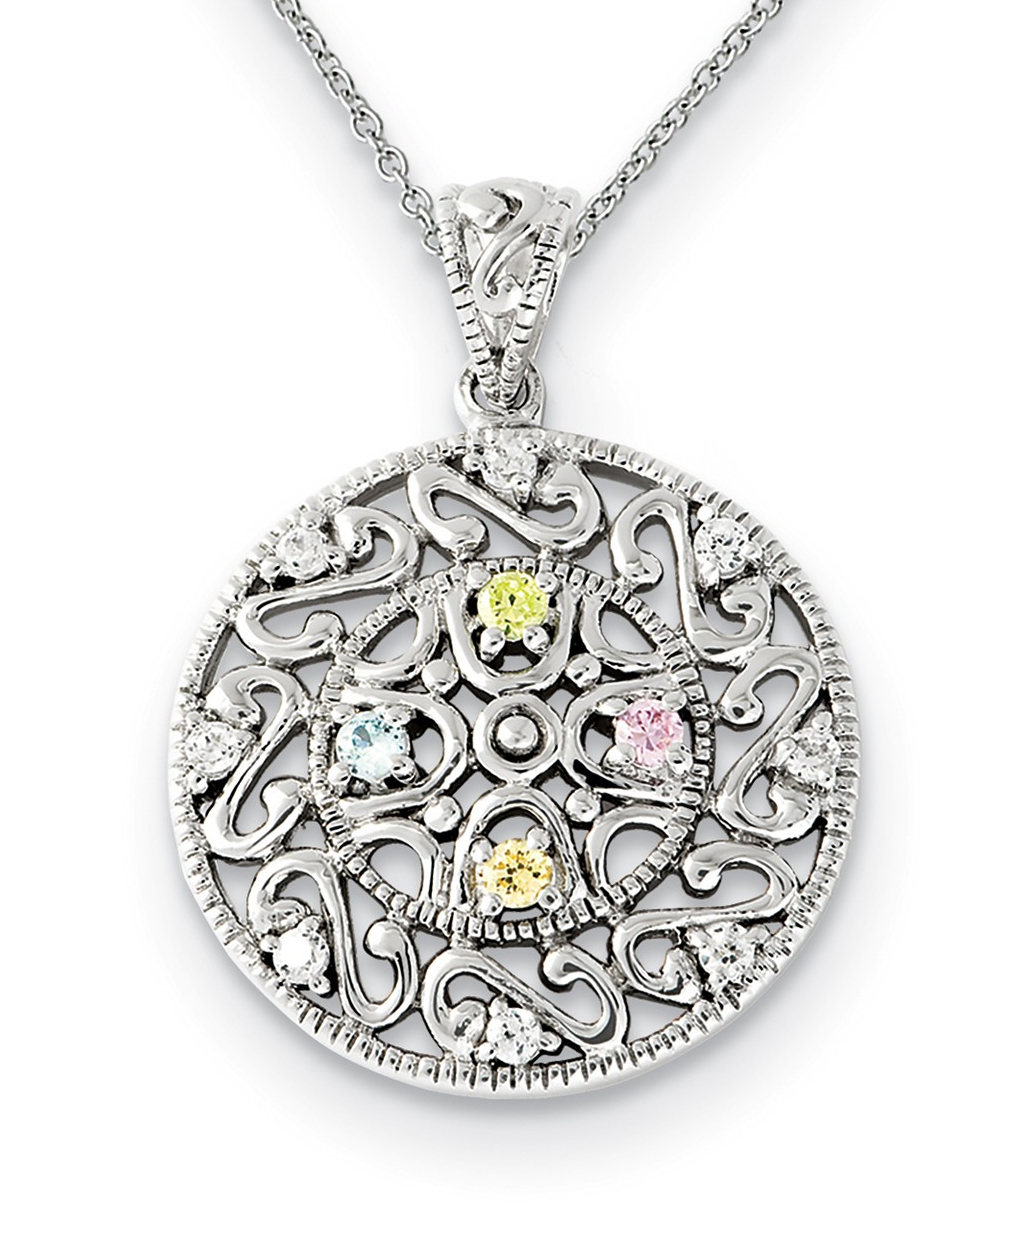  'Bliss' CZ Pendant Necklace, Rhodium-Plated Sterling Silver, 18